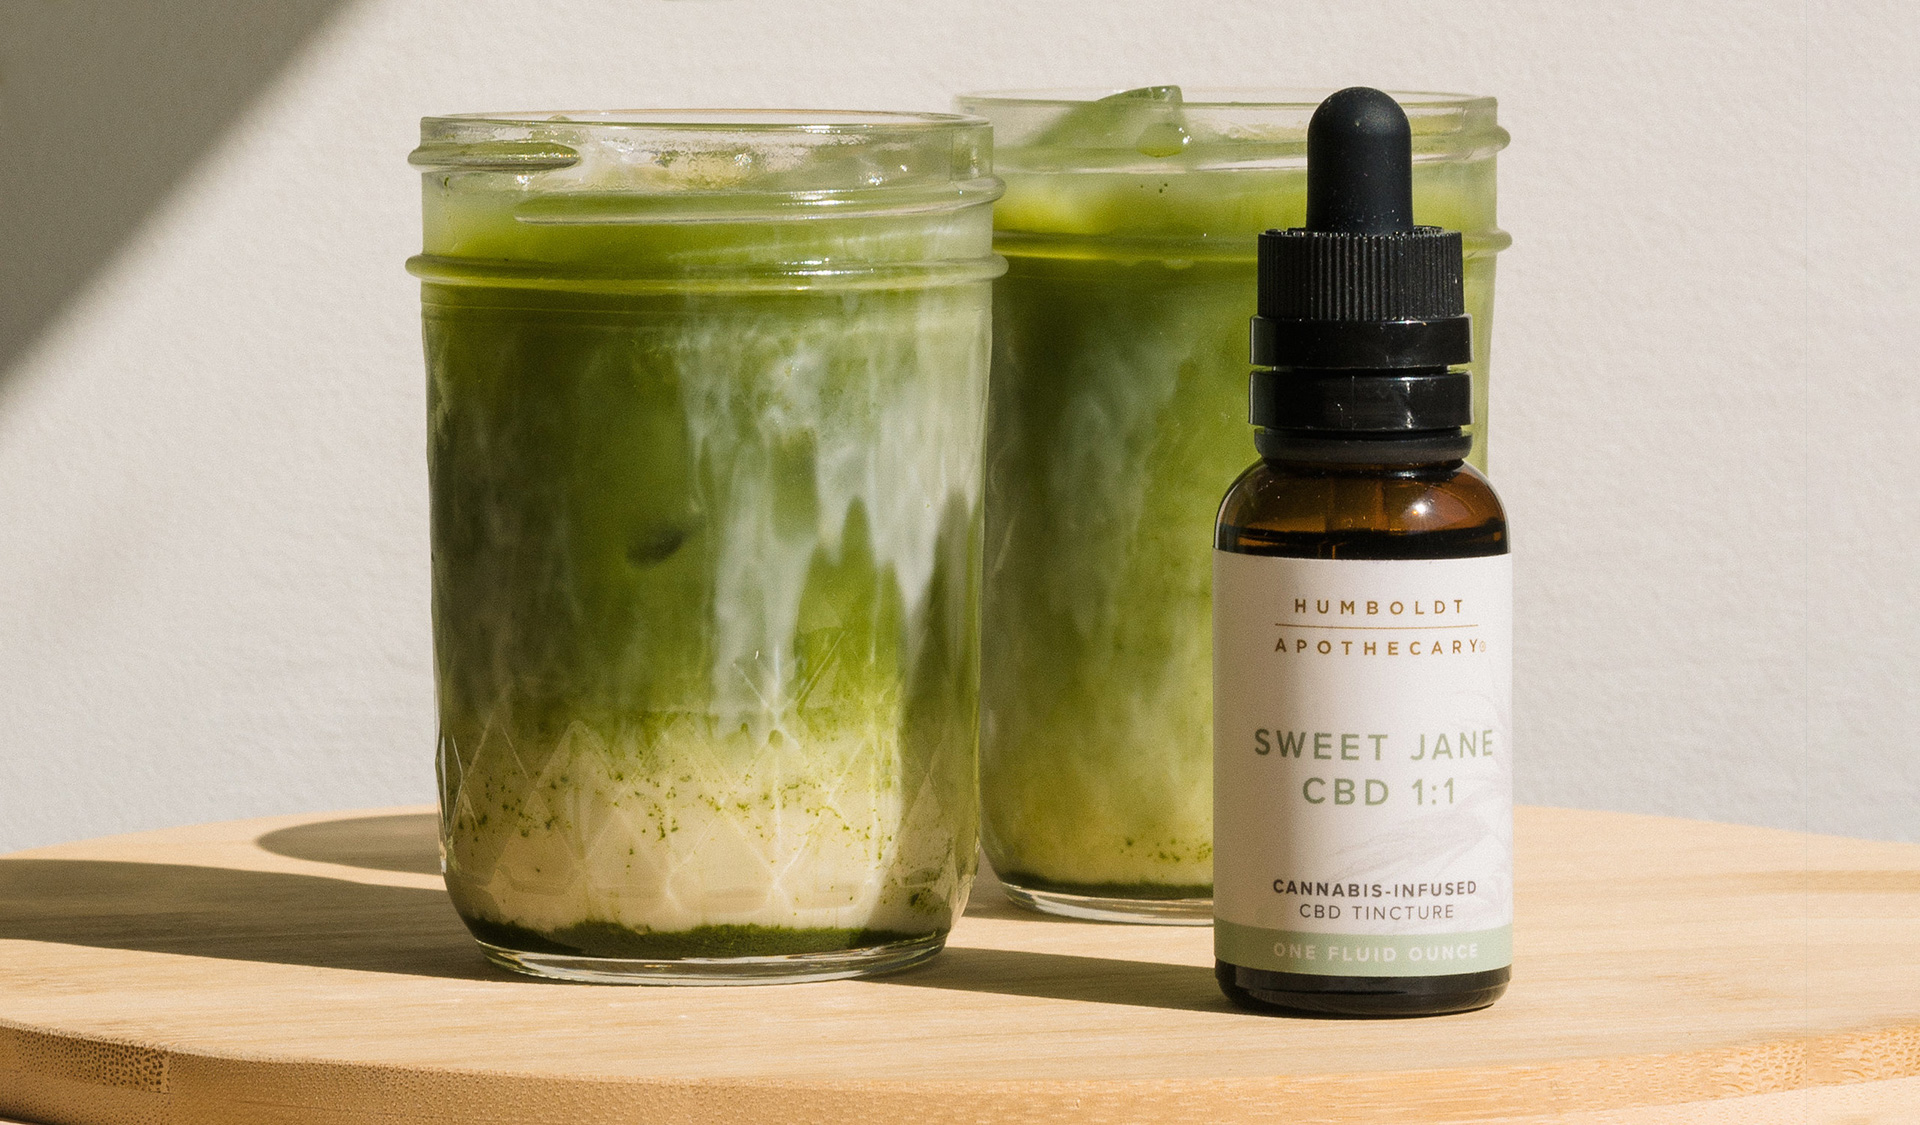 sweet jane tincture in front of match lattes on table